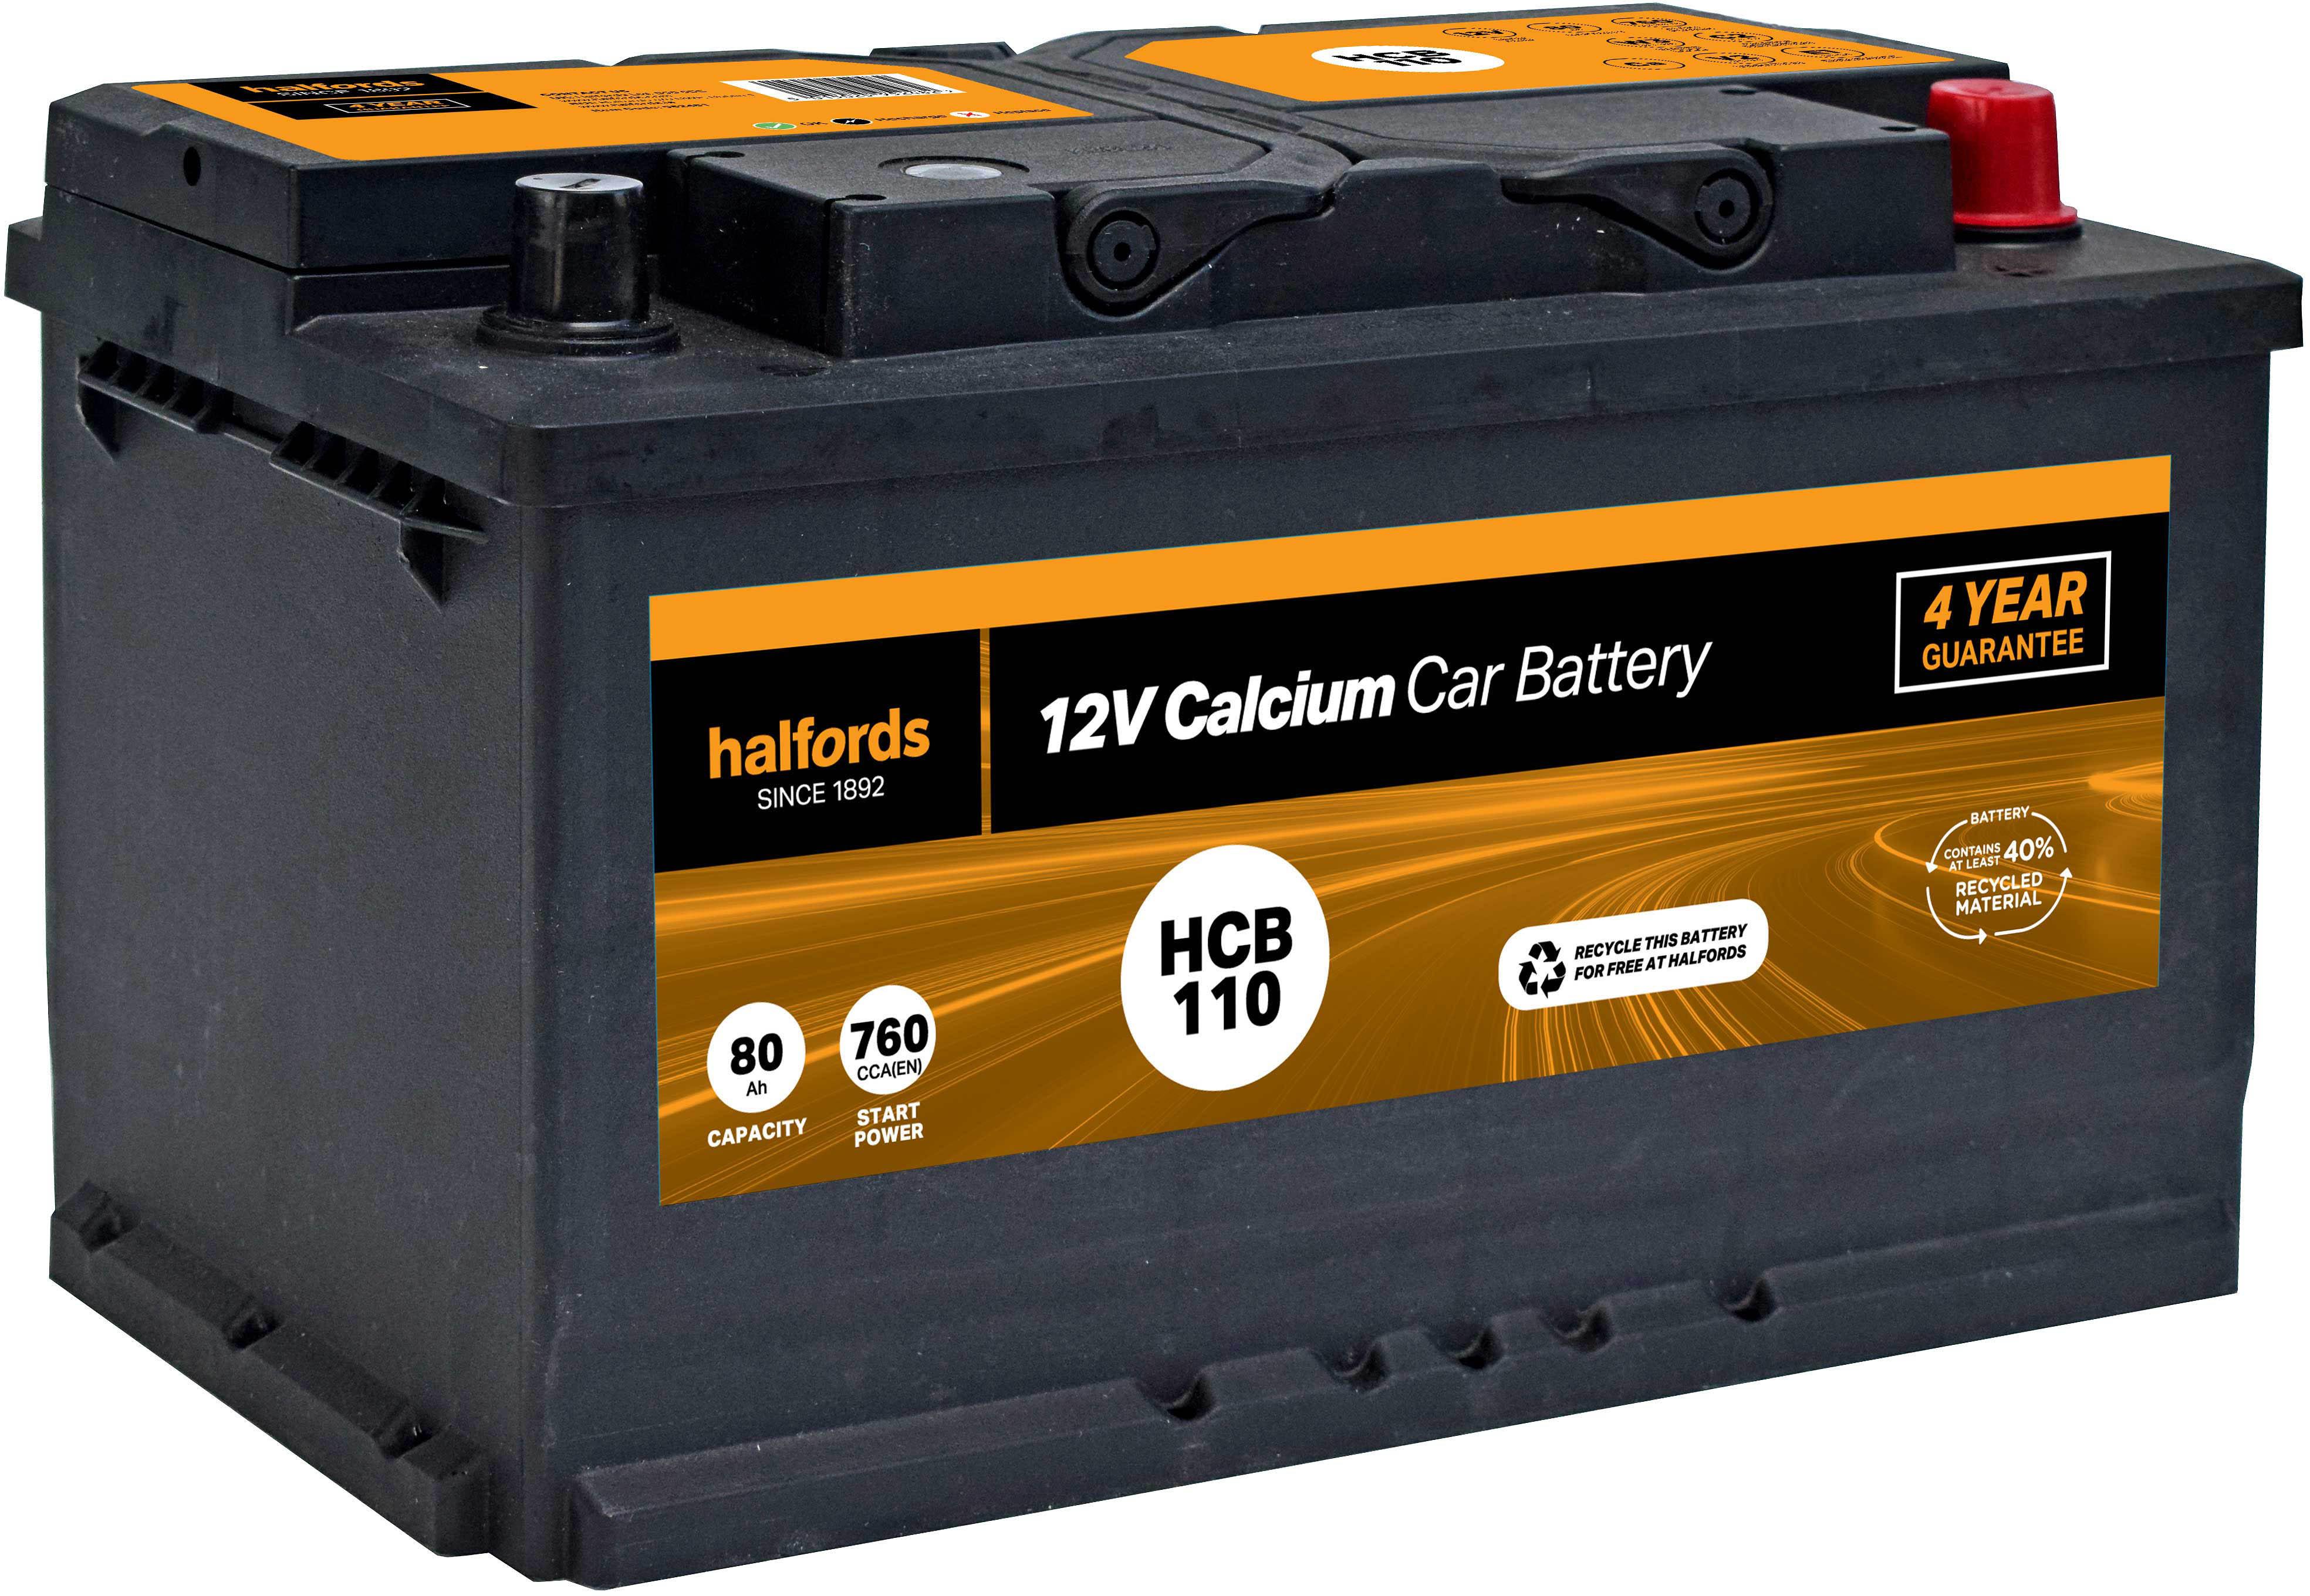 Car Batteries: Everything You Need to Know - Rijal's Blog